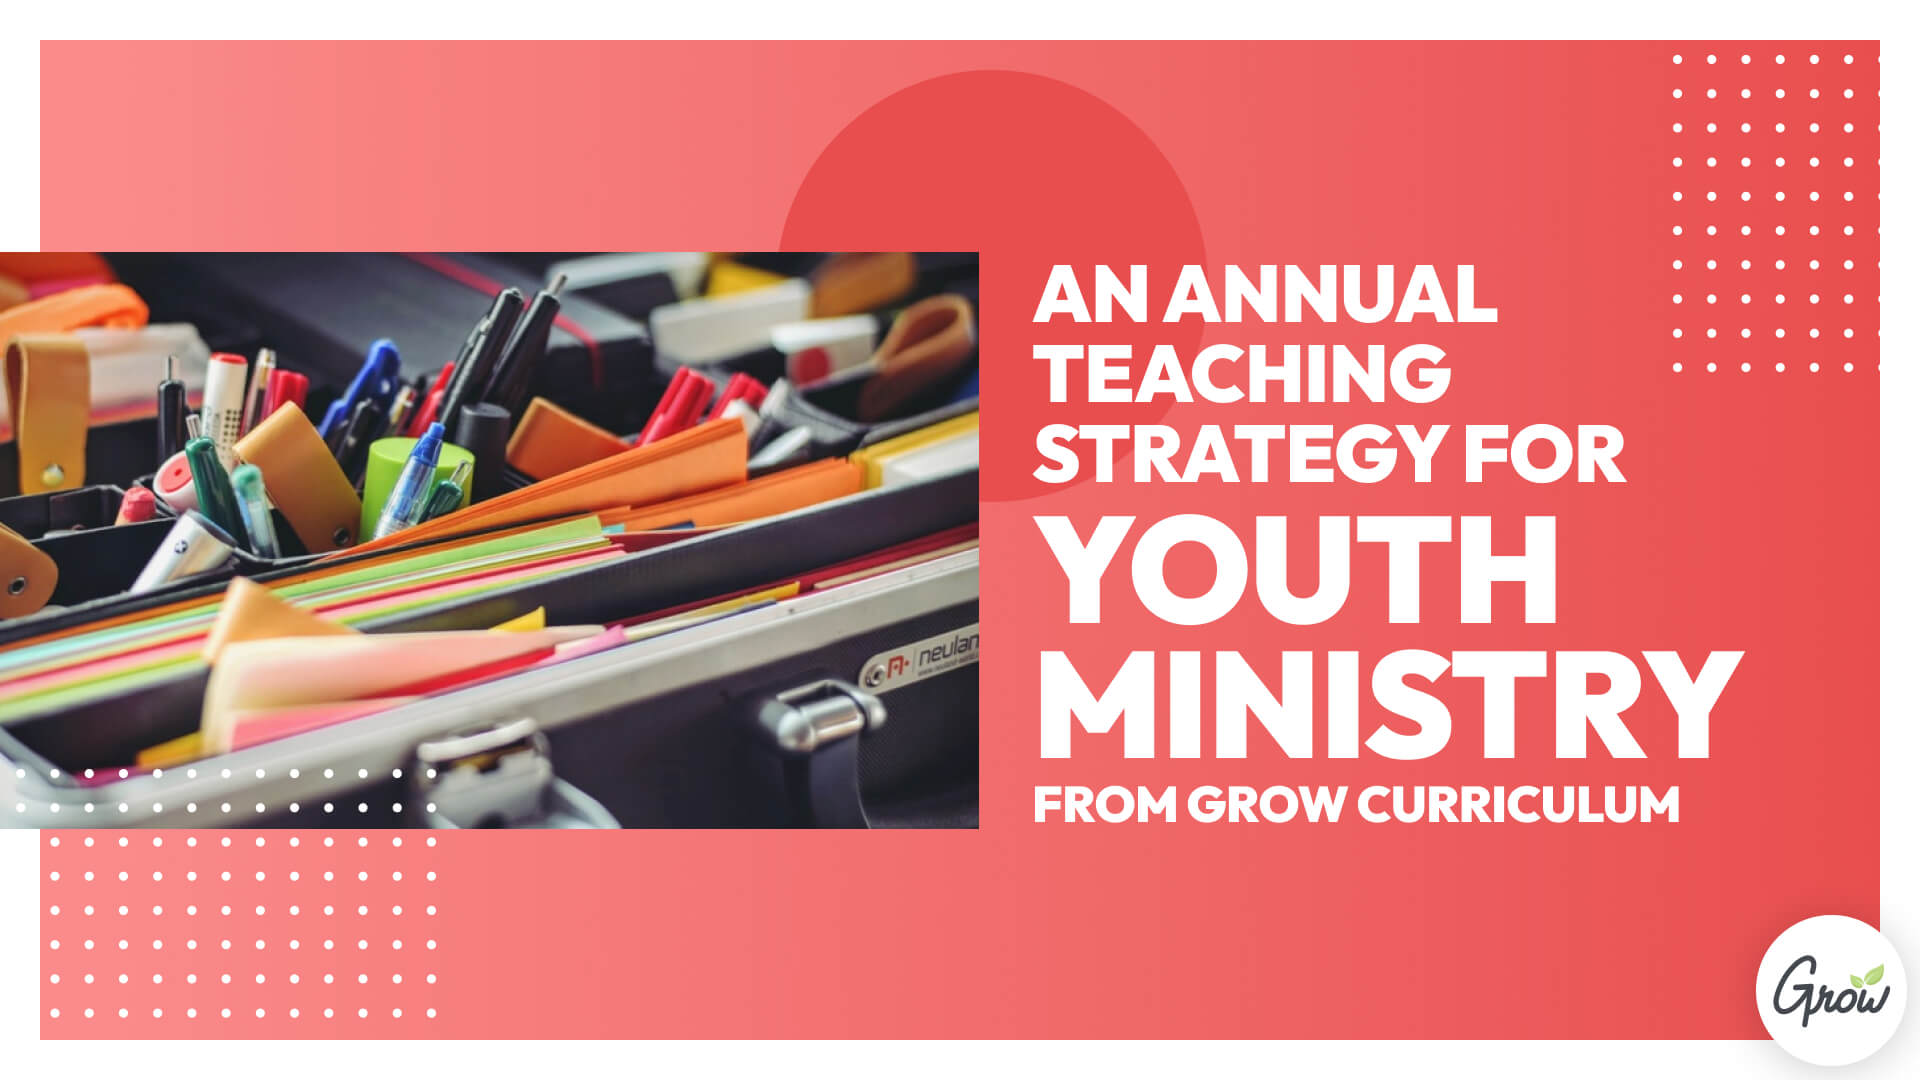 An Annual Teaching Strategy for Youth Ministry from Grow Curriculum